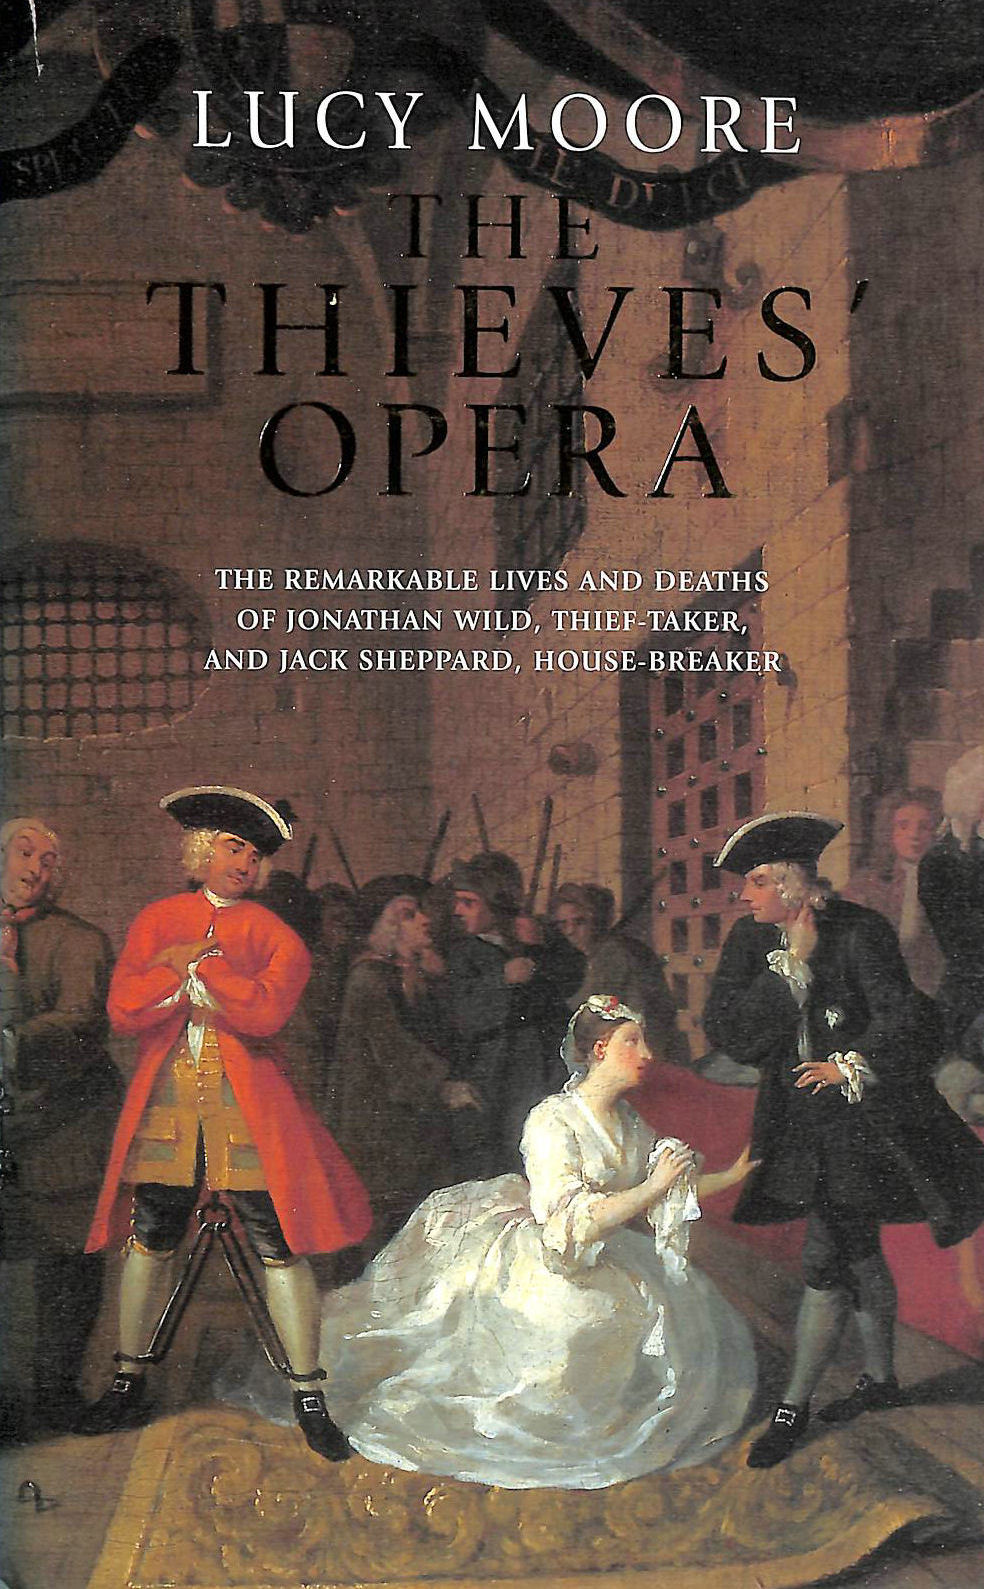 MOORE, MRS LUCY - The Thieves' Opera: The Remarkable Lives And Deaths of Jonathan Wild, Thief-Taker, And Jack Sheppard, House-Breaker